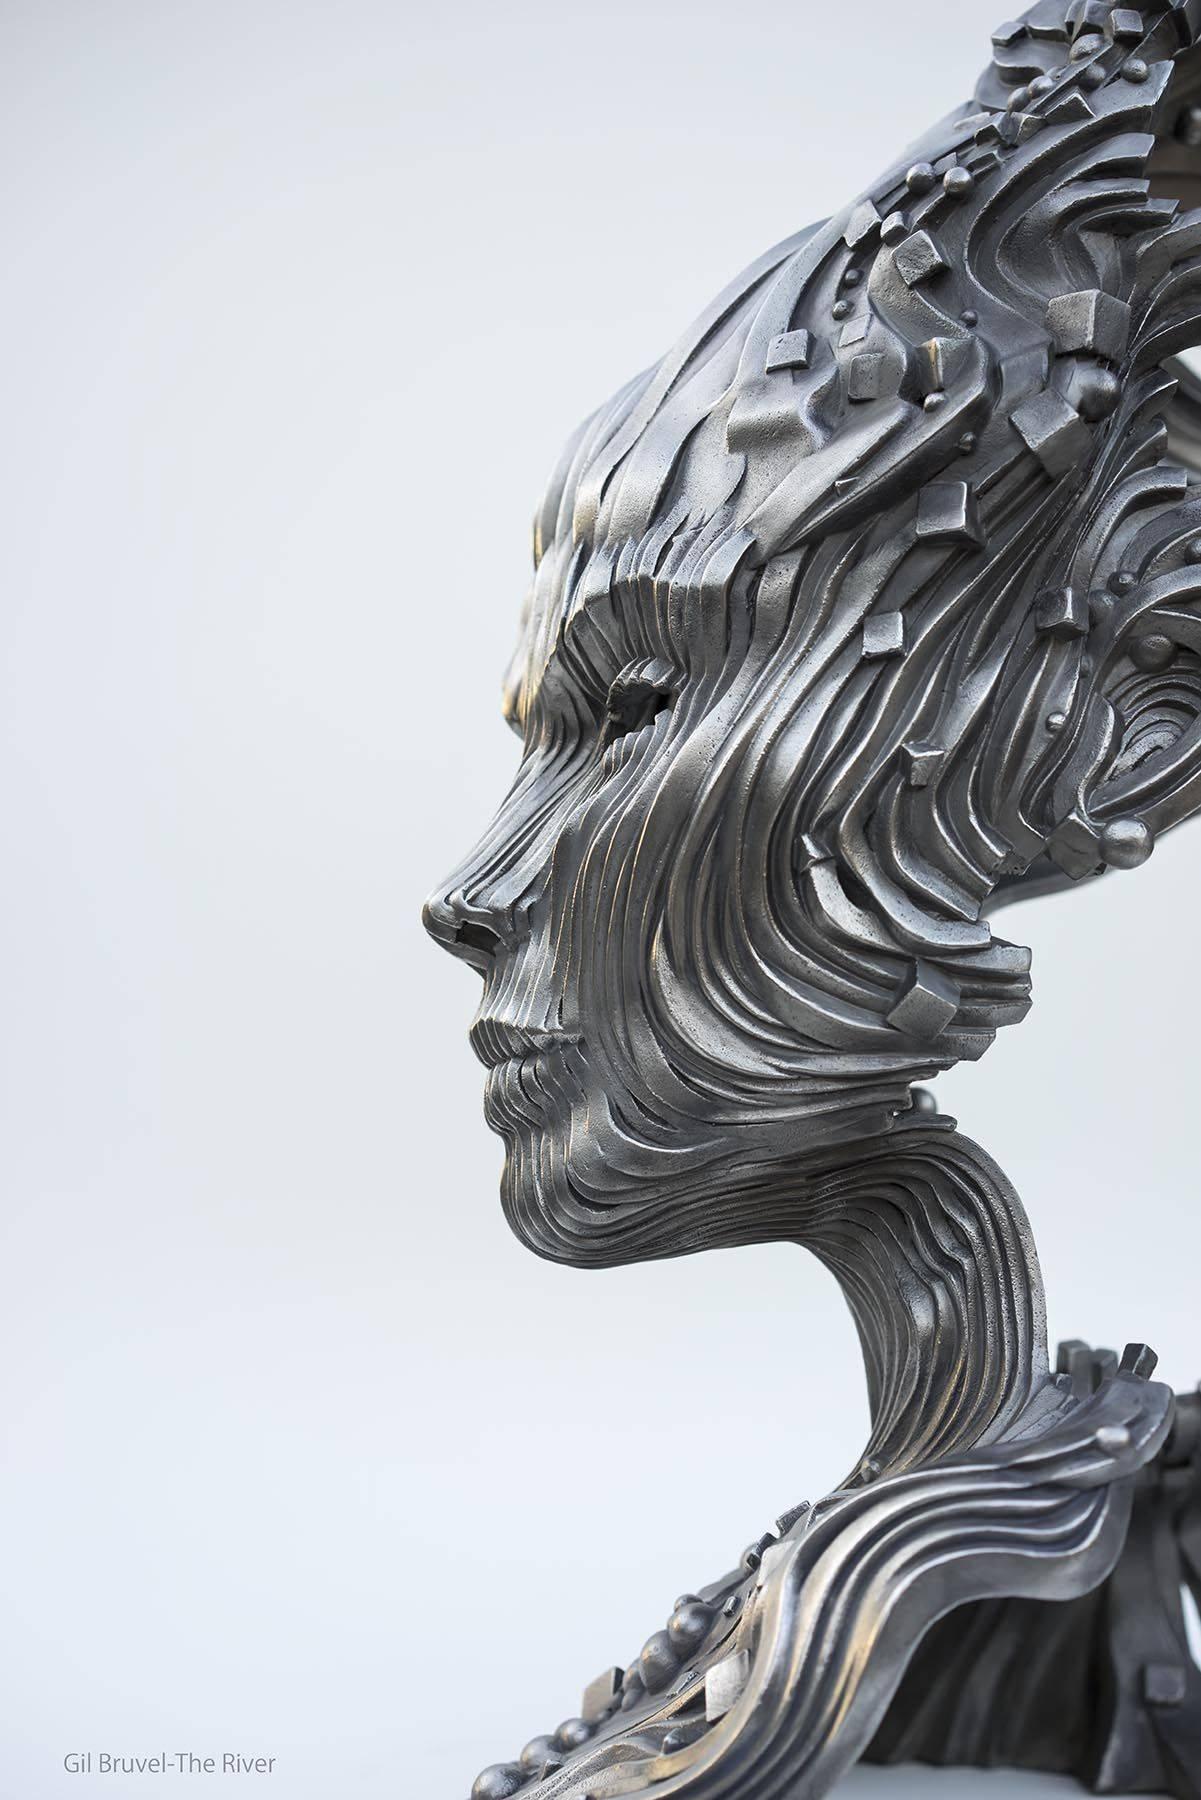 The River - Sculpture by Gil Bruvel